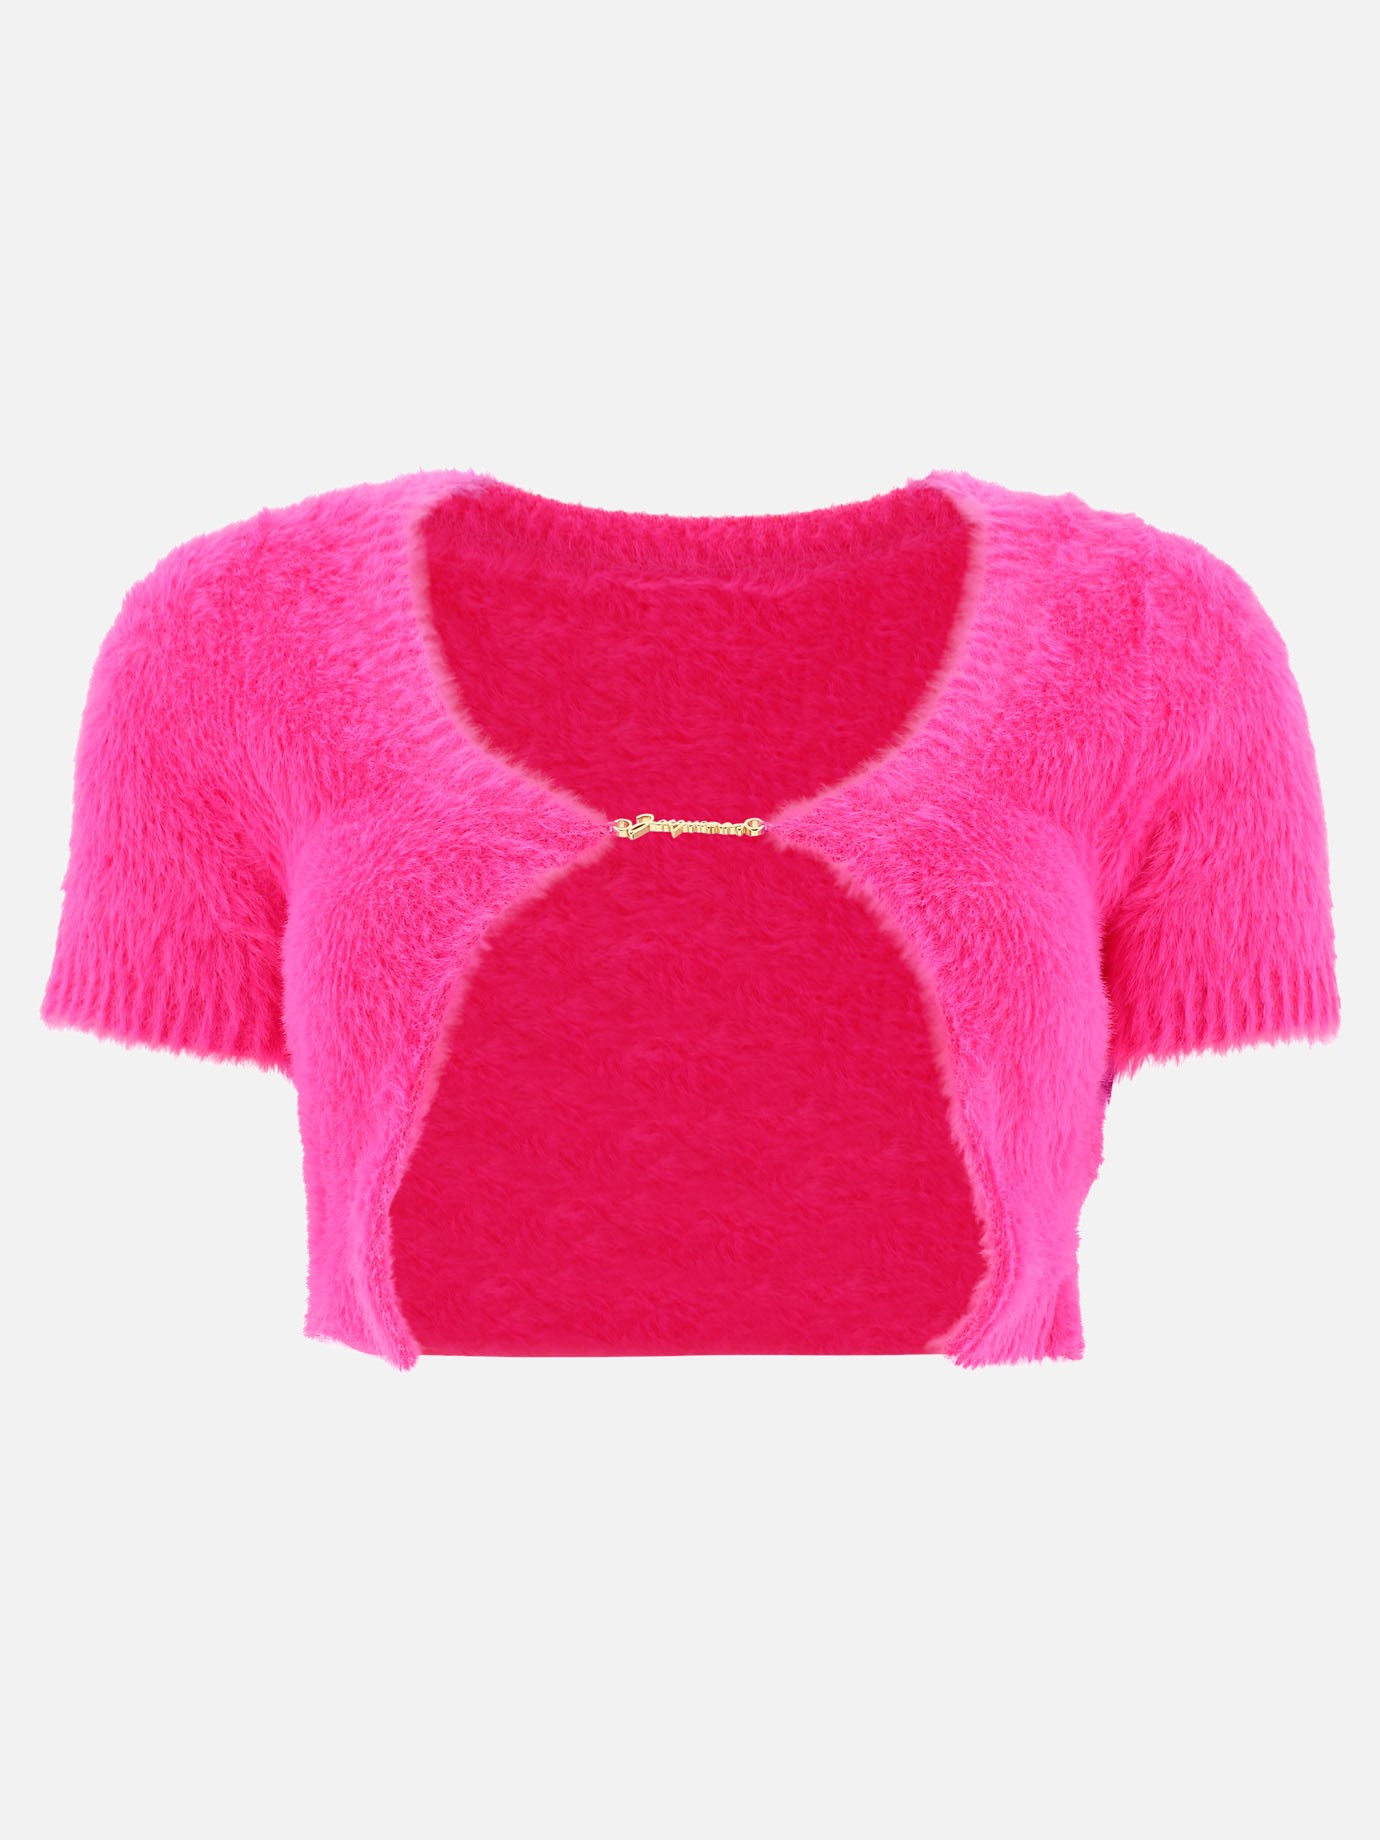  La Maille Neve cardigan by Jacquemus - 0